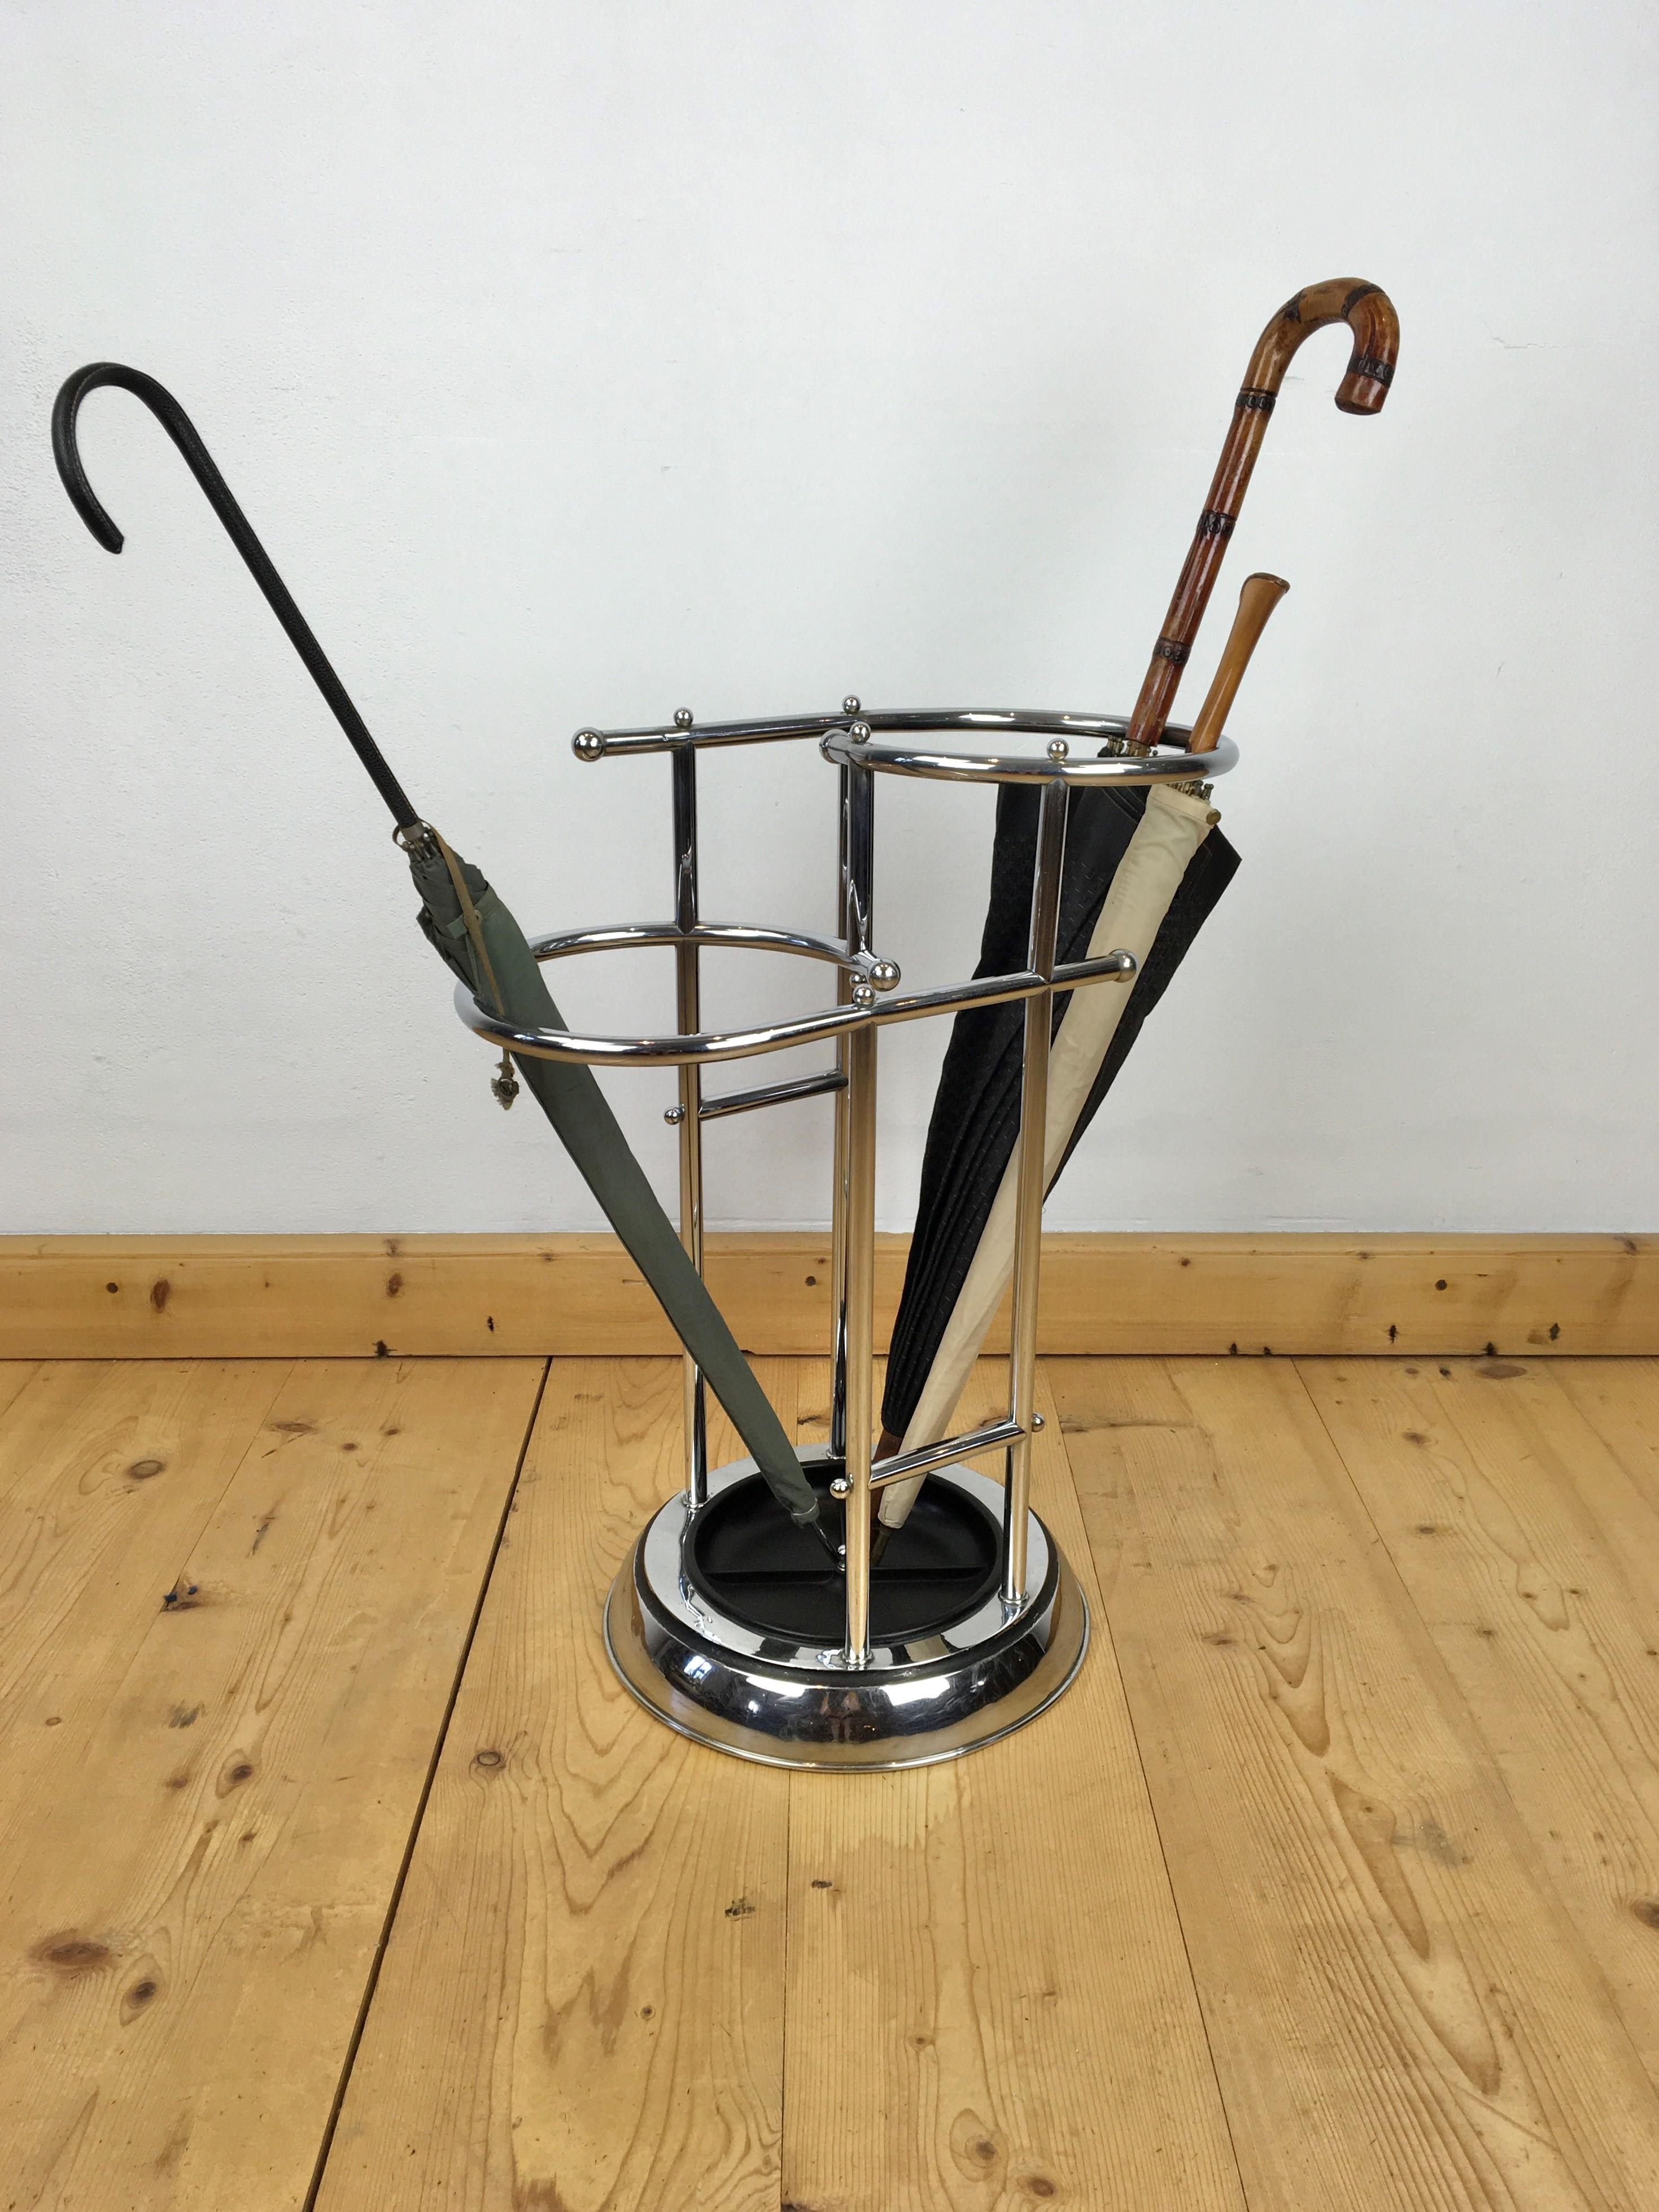 Chrome with bakelite umbrella stand by Demeyere Belgium. 
This Art Deco umbrella stand or umbrella holder has a beautiful rounded shape in Bauhaus Style. 
It has 2 sections: one left and one right to place the umbrellas. 
The chrome of this